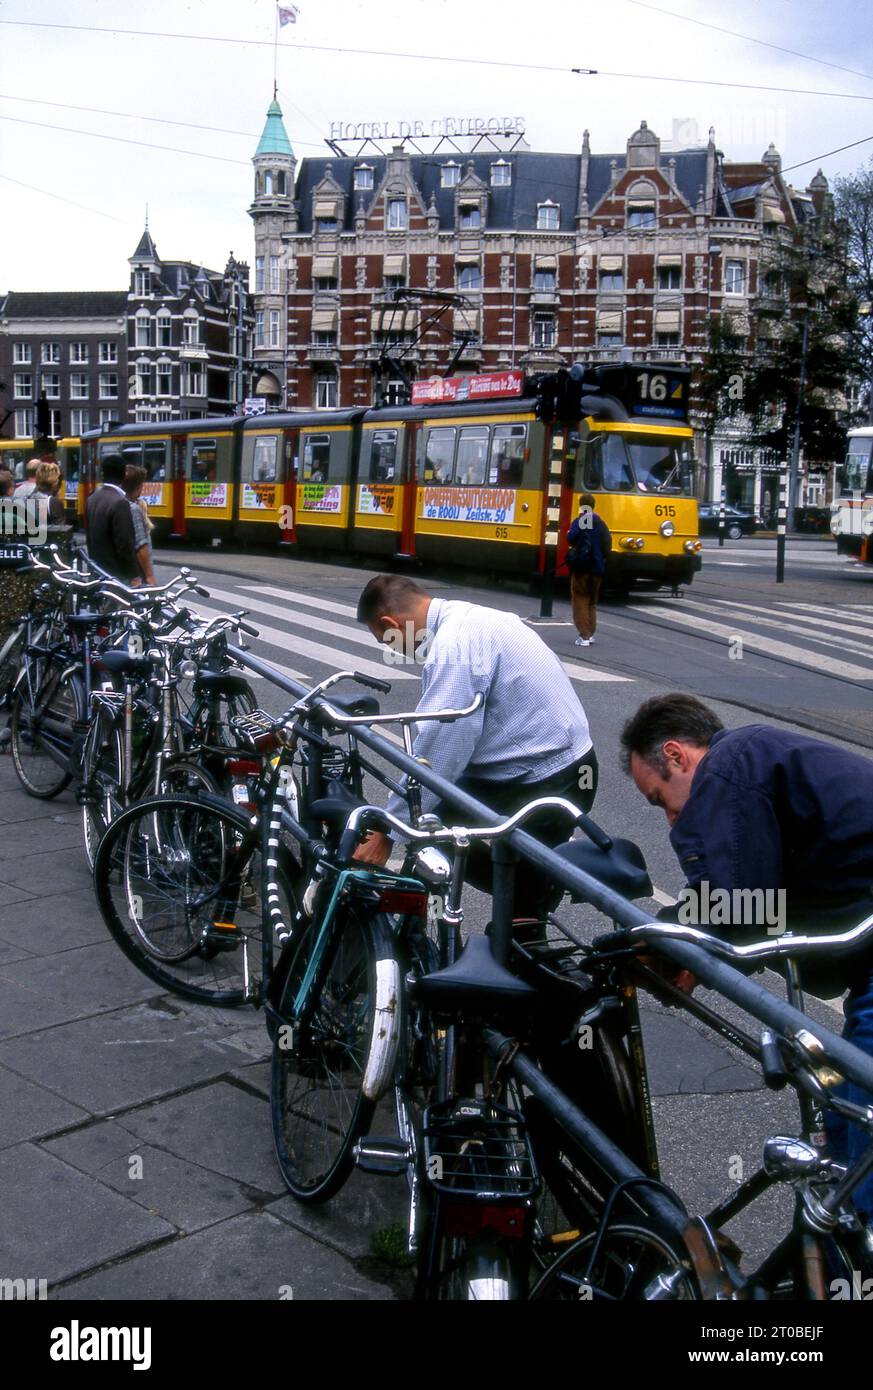 Street scene with peole locking thier bikes as a street car approaches in Amsterdam, Holland Stock Photo